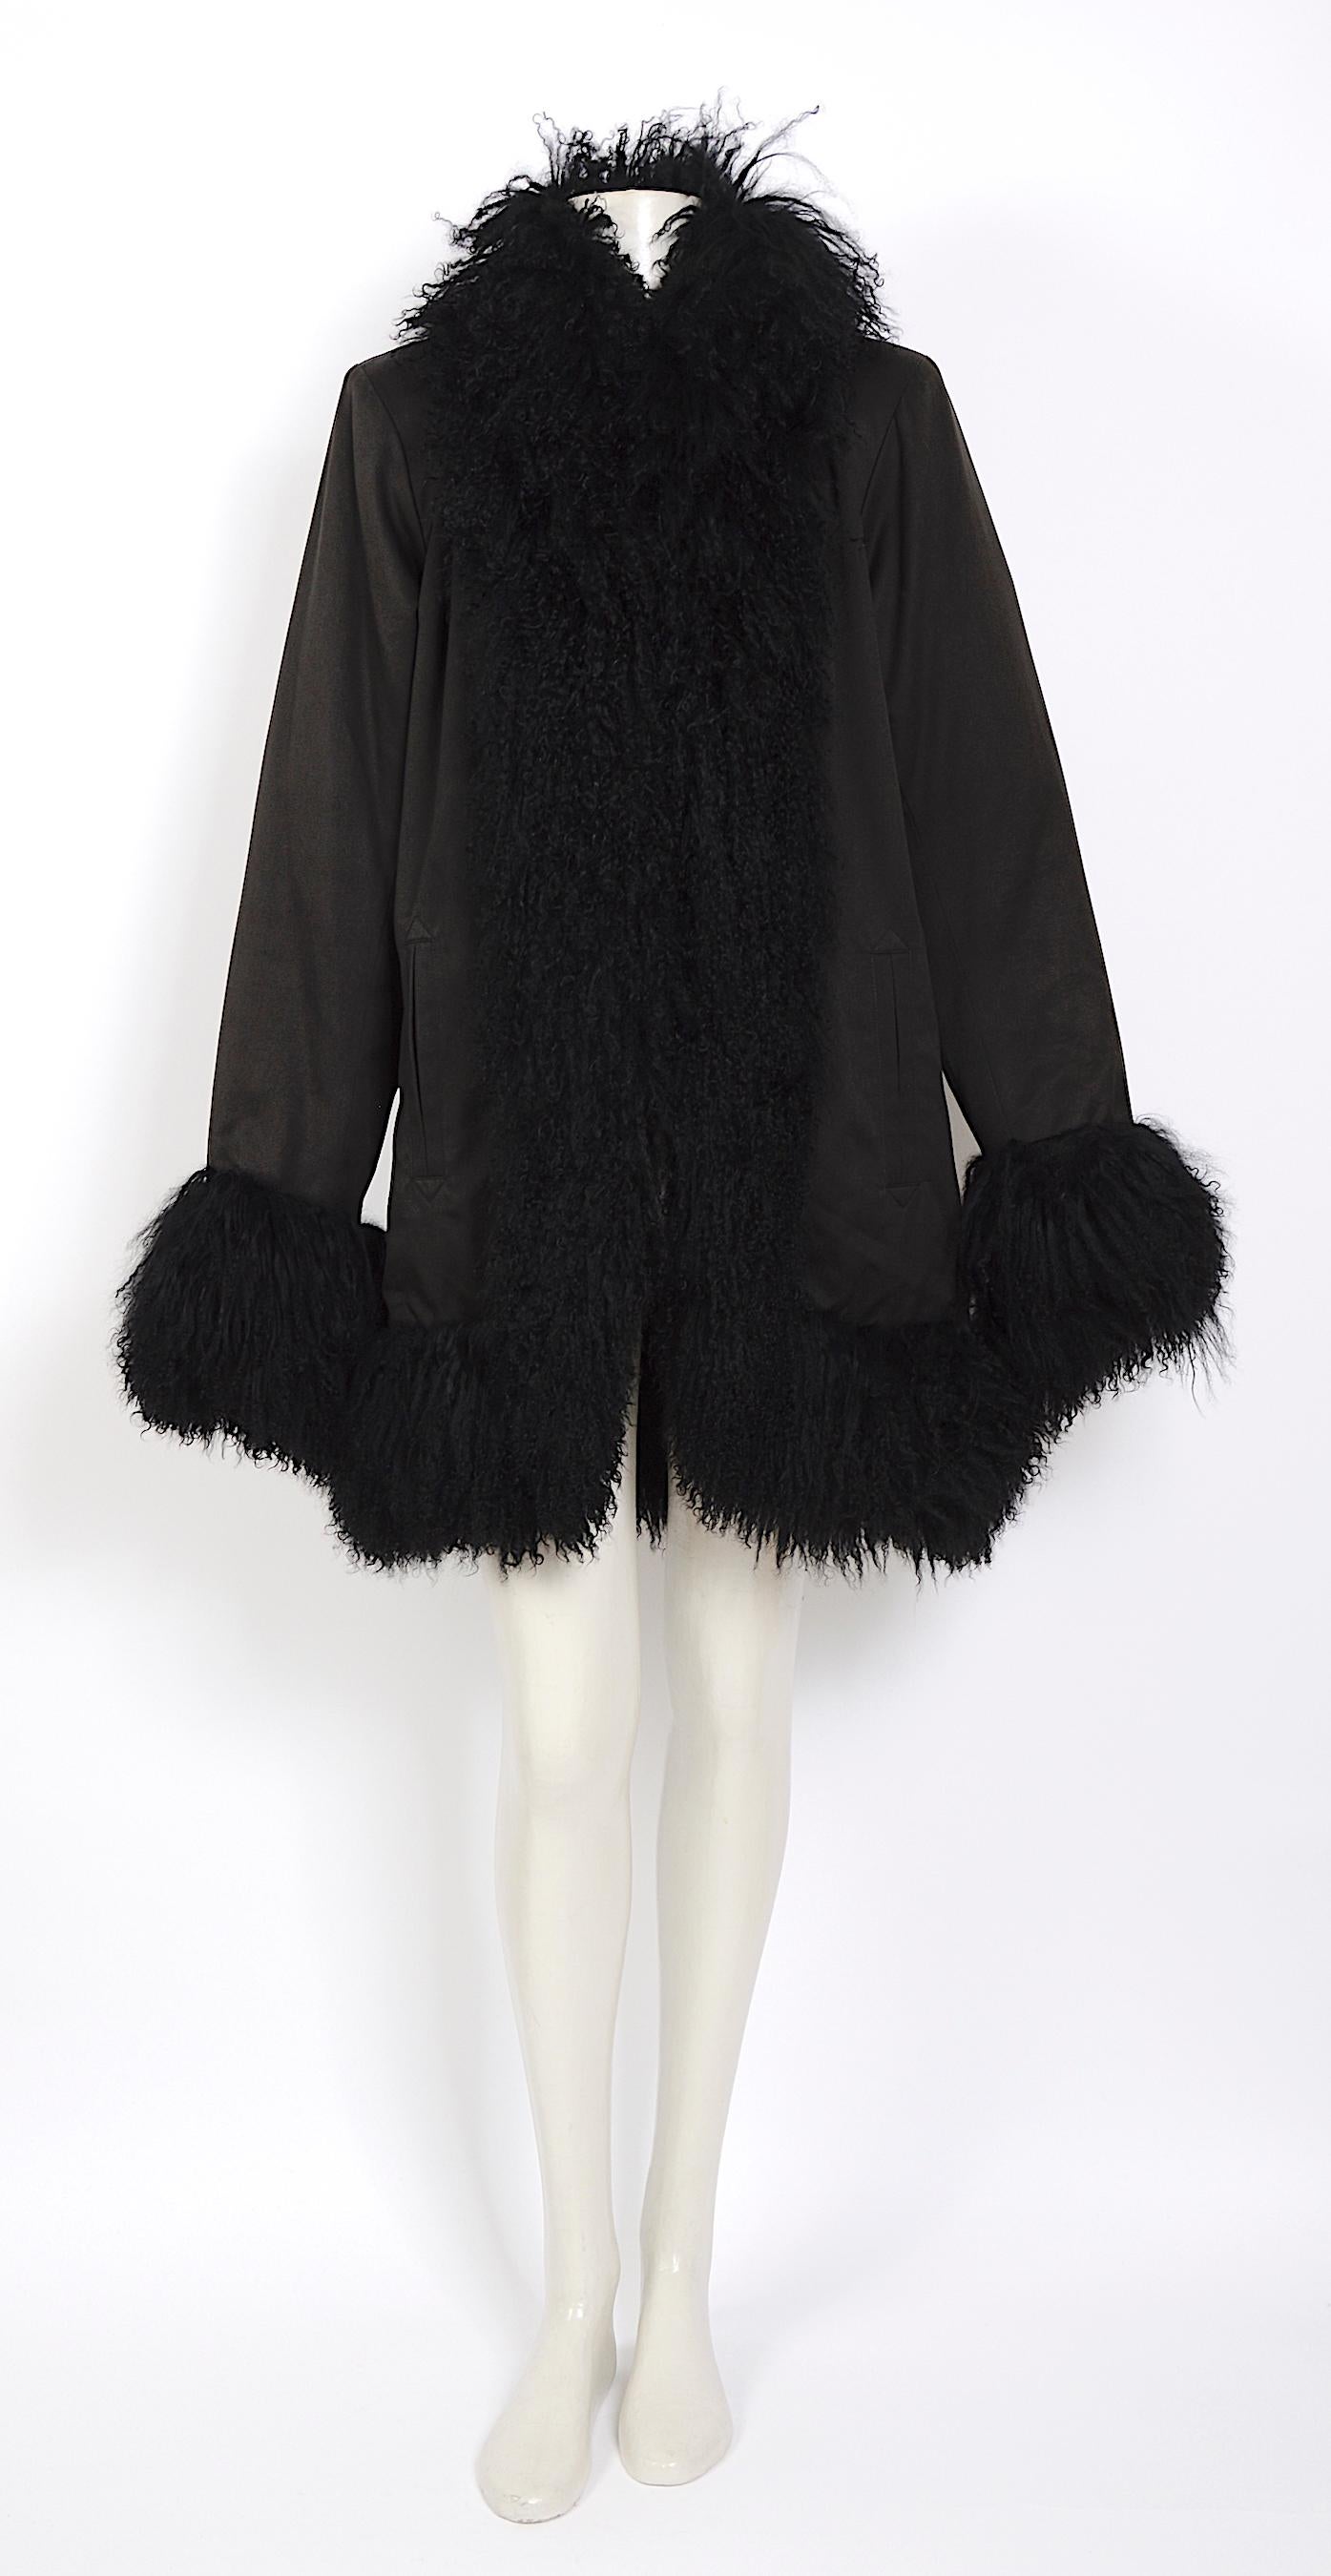 The perfect vintage coat by Yves Saint Laurent.
Anthony Vaccarello has dived into Saint Laurent's archives once more! We can find a close inspiration for this original 1970s coat in the current 2022 Fall-Winter collection (see pictures 6)
This rare